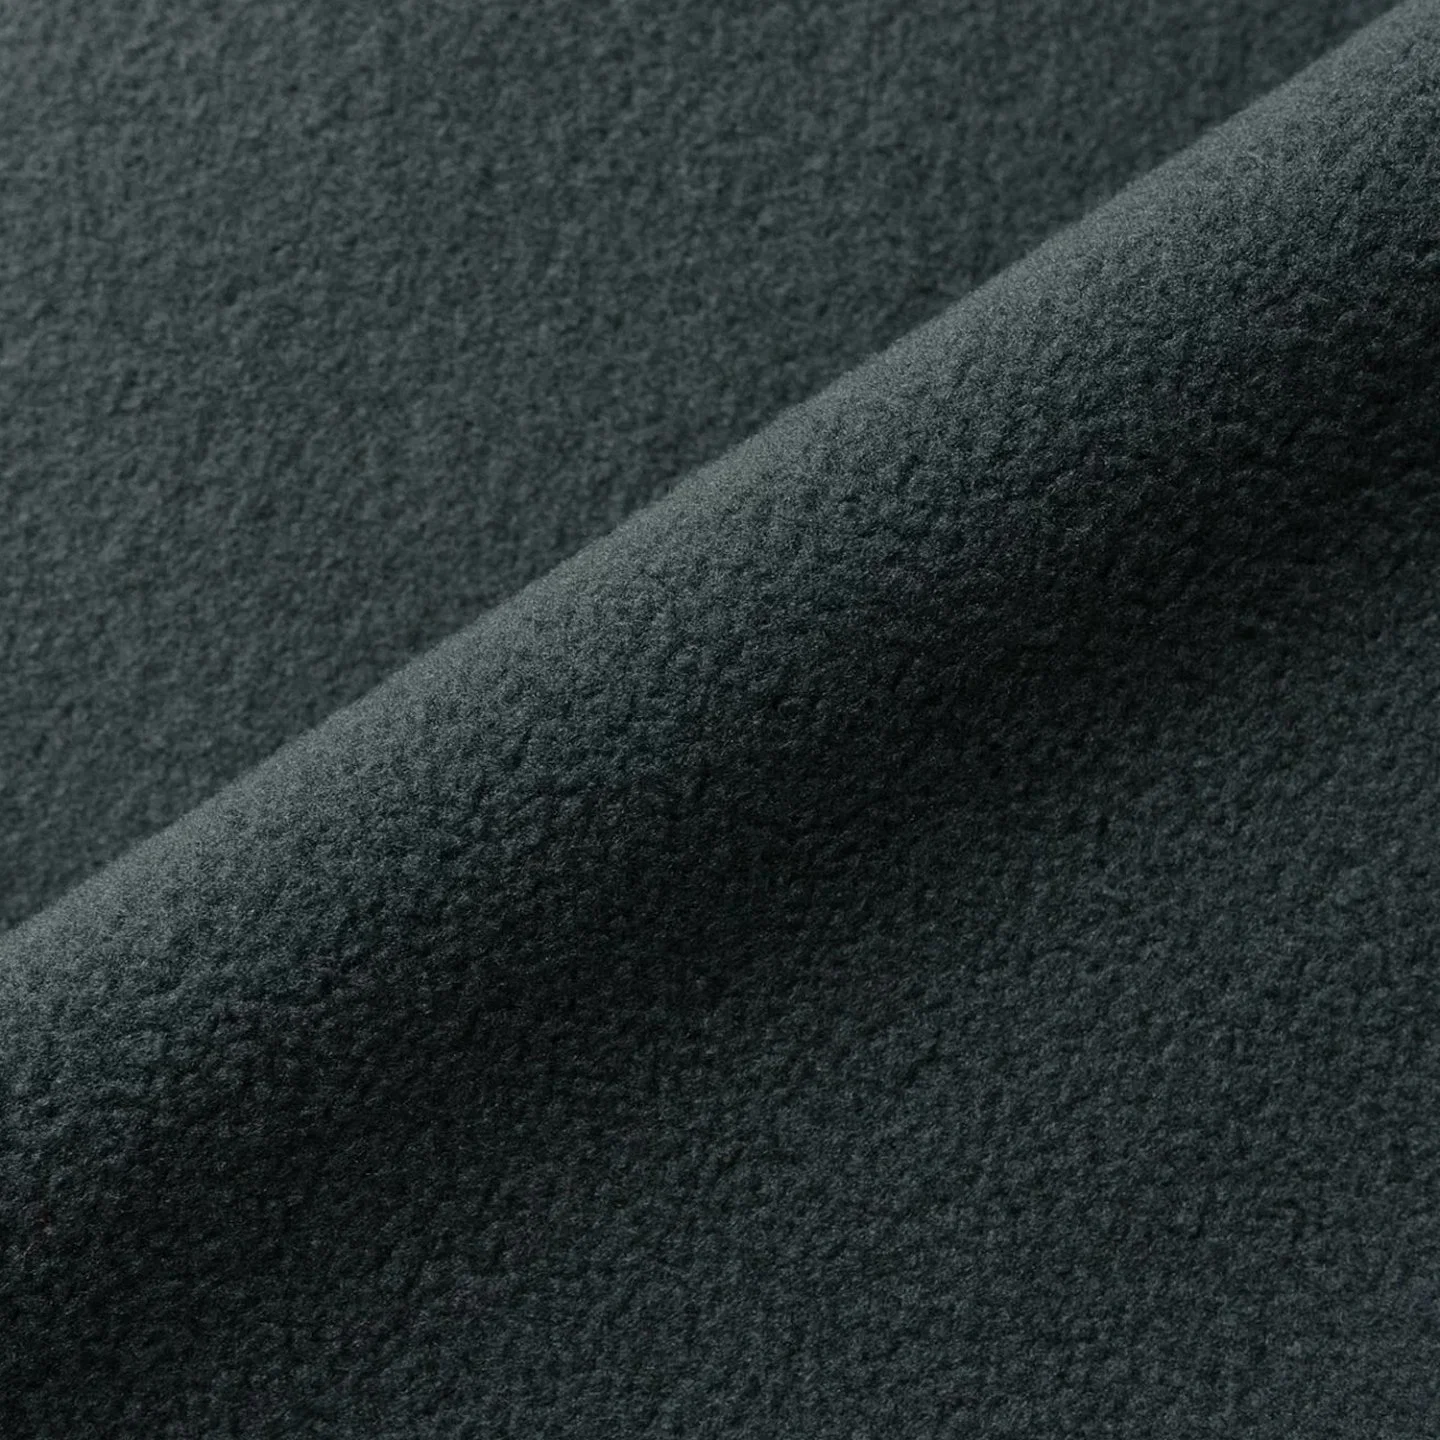 Plain Cuddle Fleece Fabric Lyocell Organic Cotton French Terry Knitted Fleece Fabric Supplier